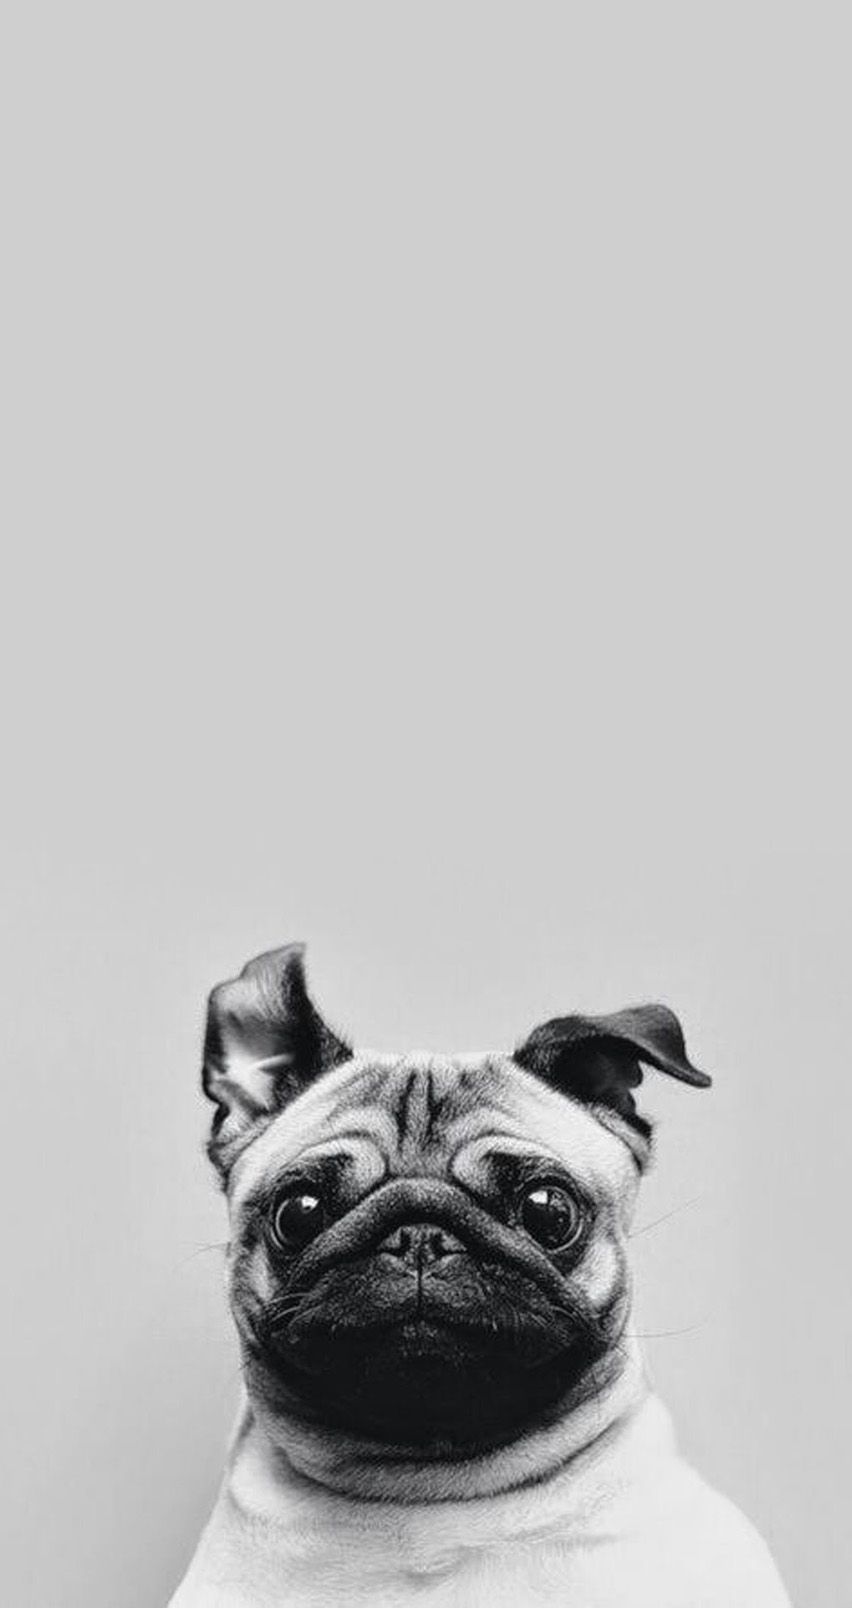 Cute Animal For Iphone Wallpapers